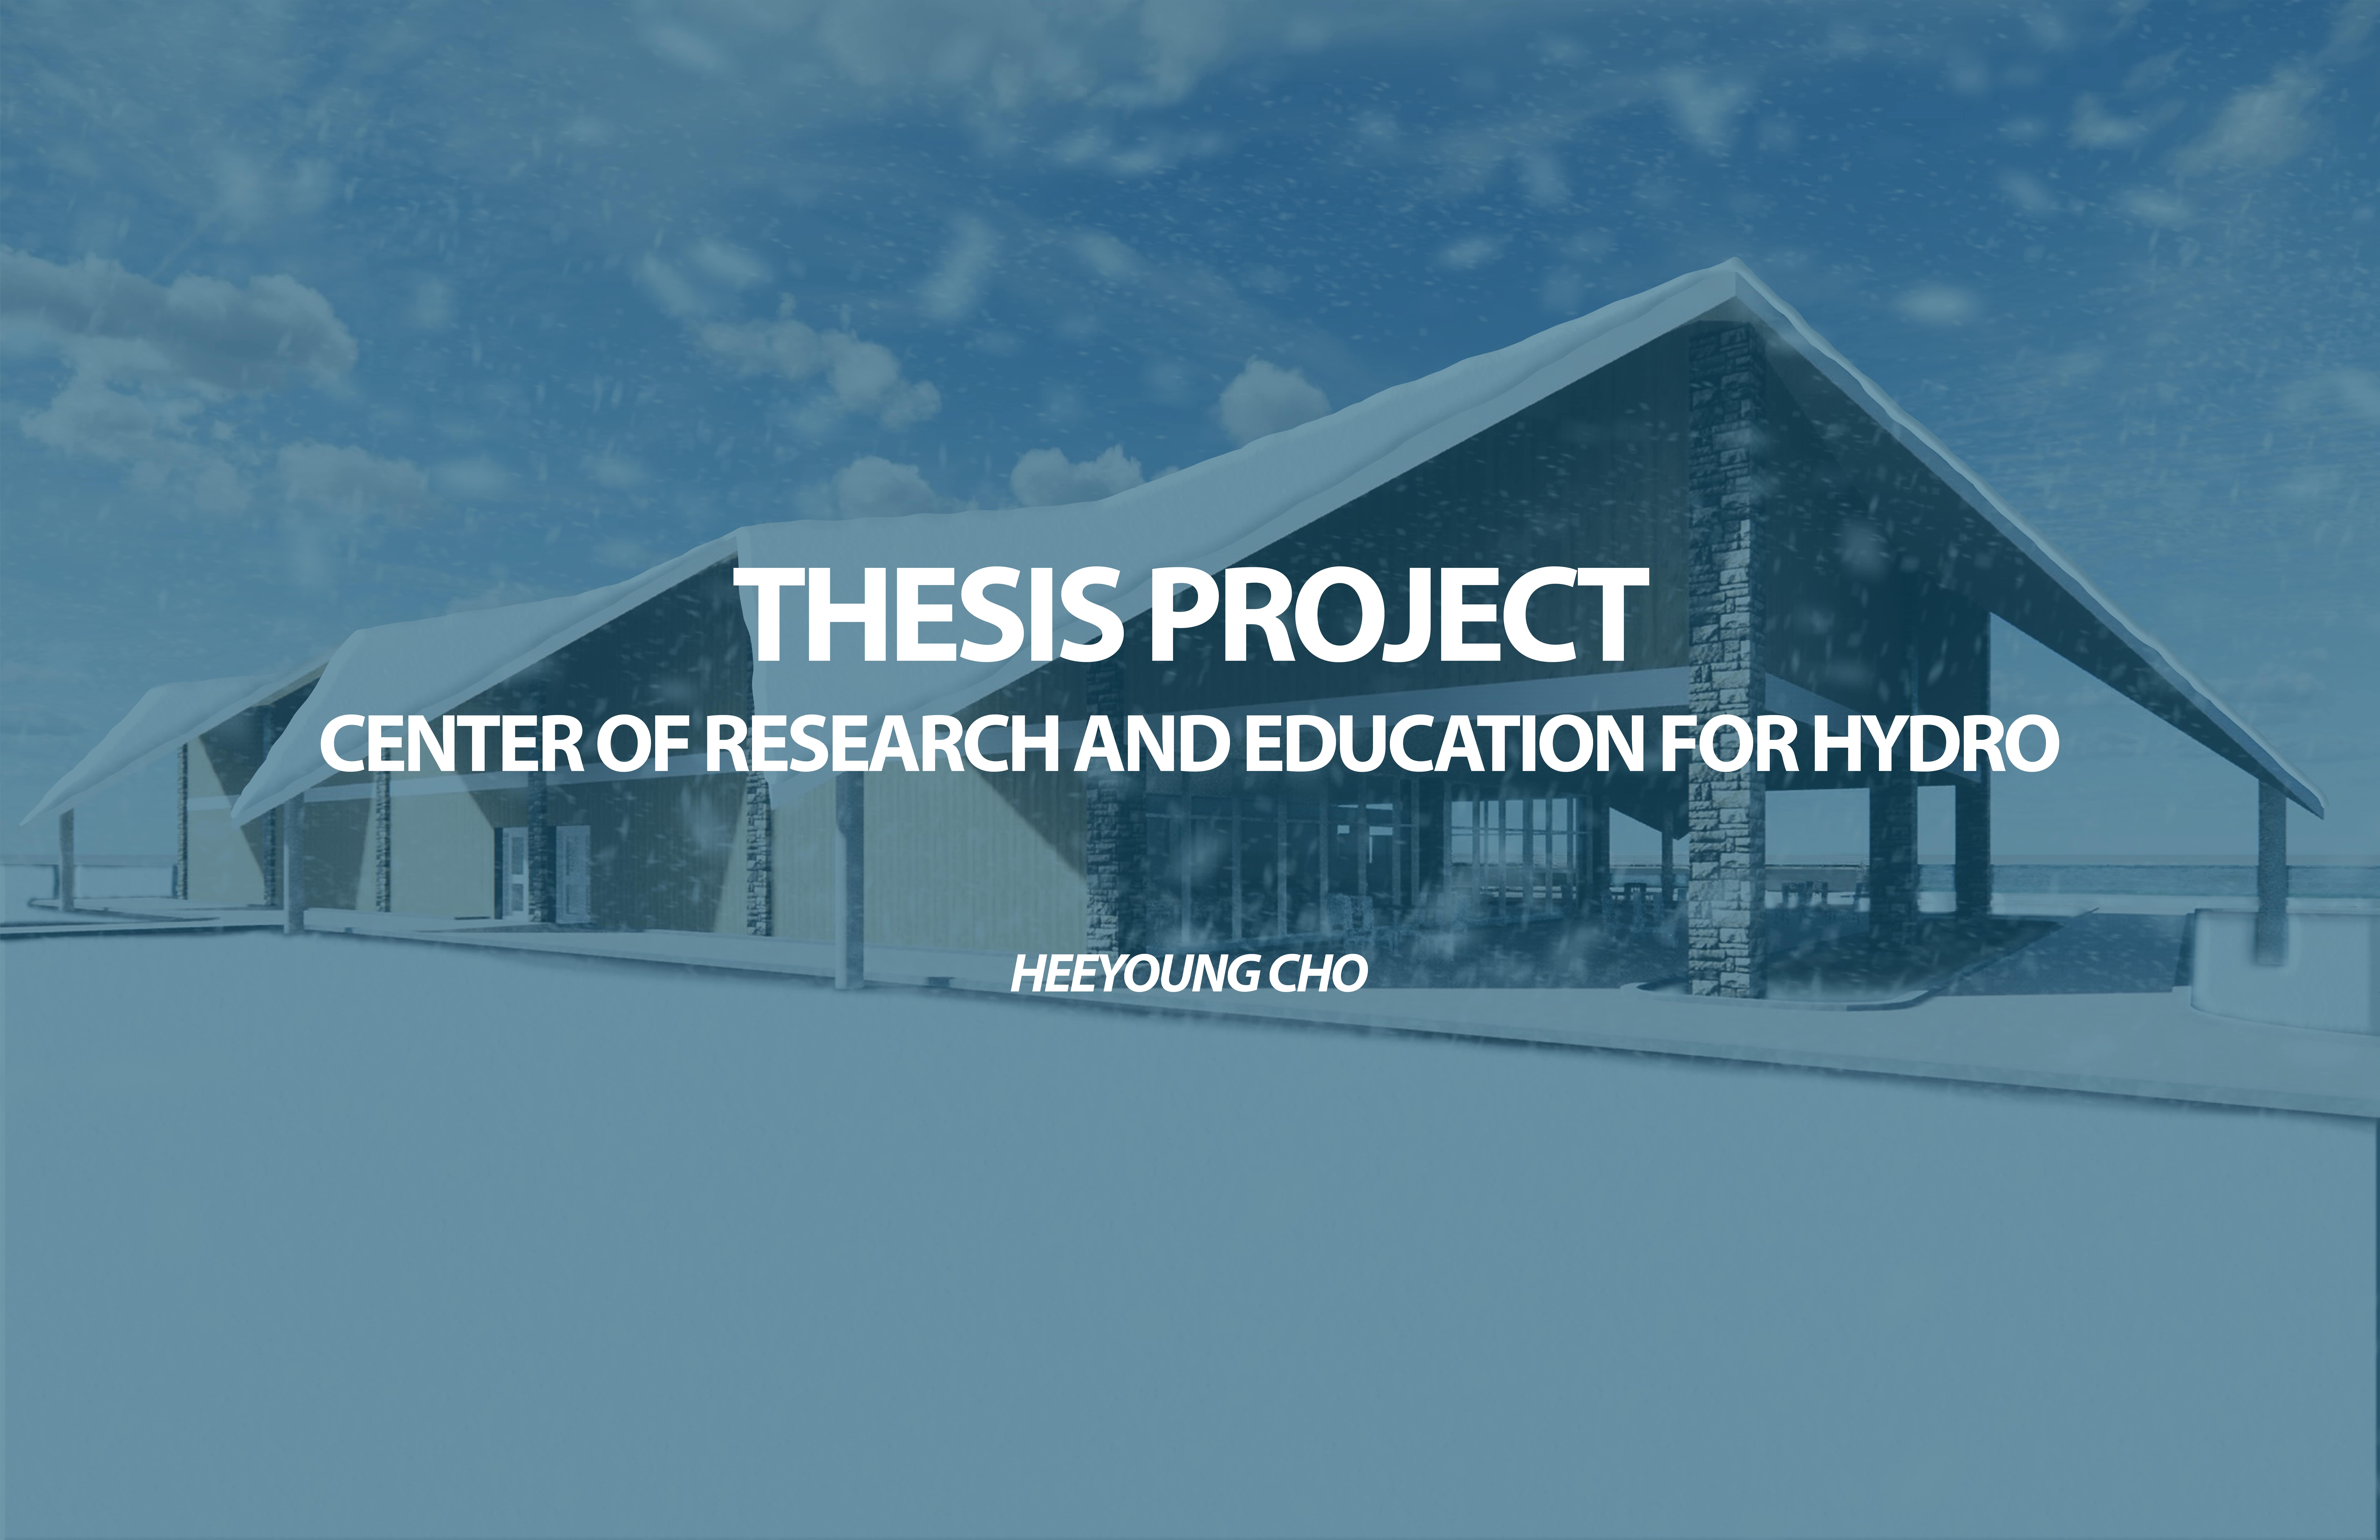 Center of Research and Education for Hydro